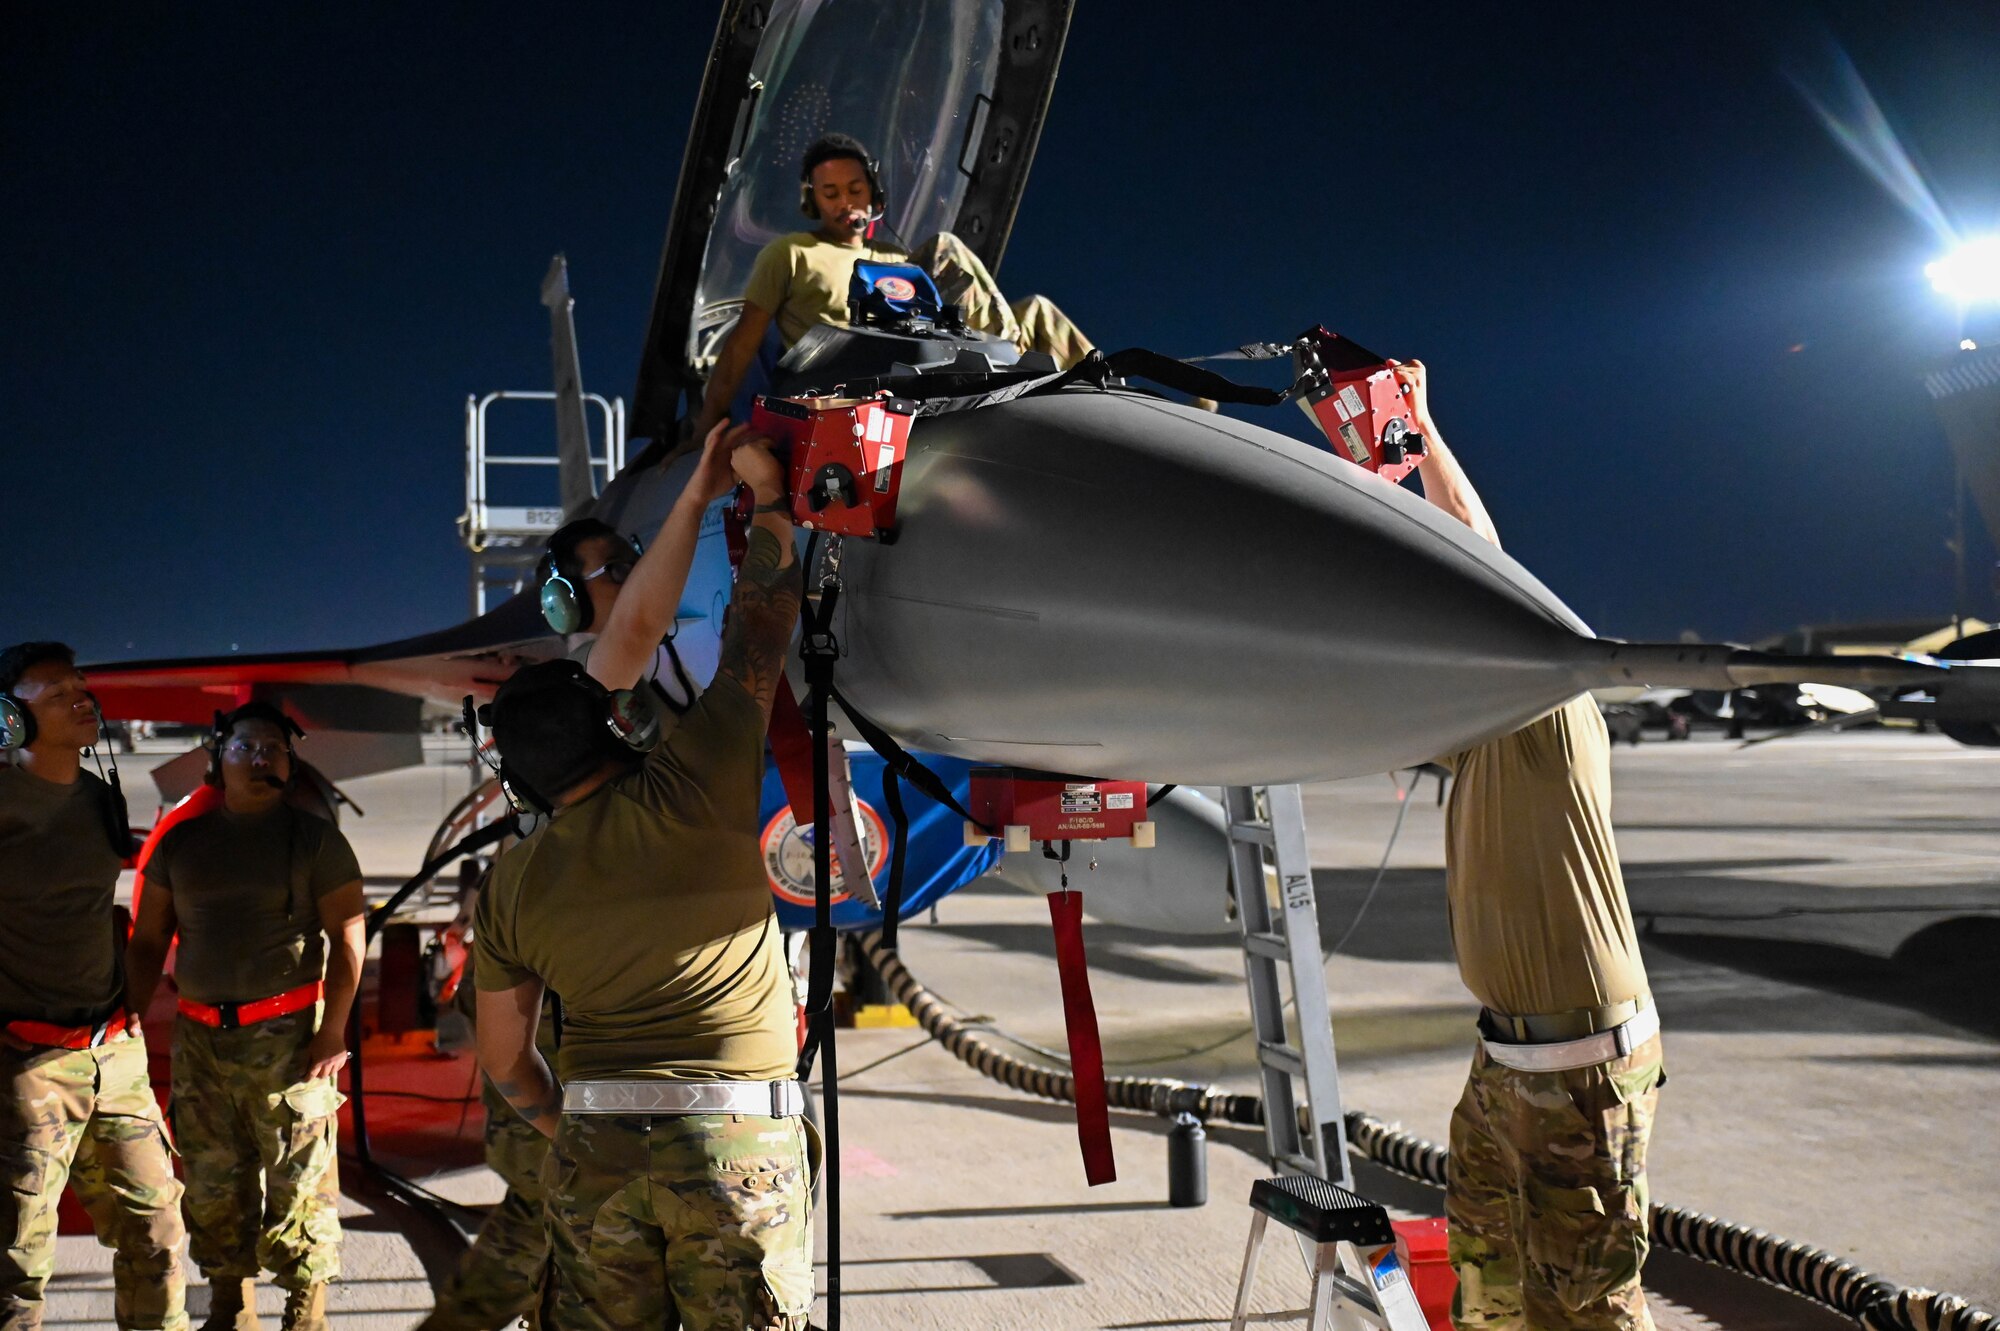 Airmen from the 87th Electronic Warfare Squadron perform COMBAT SHIELD electronic warfare assessments on an F-16 Fighting Falcon at Nellis Air Force Base, Nev., July 13, 2023. The 87th EWS evaluated the EW systems of the aircraft to ensure readiness. (U.S. Air Force photo by Capt. Benjamin Aronson)